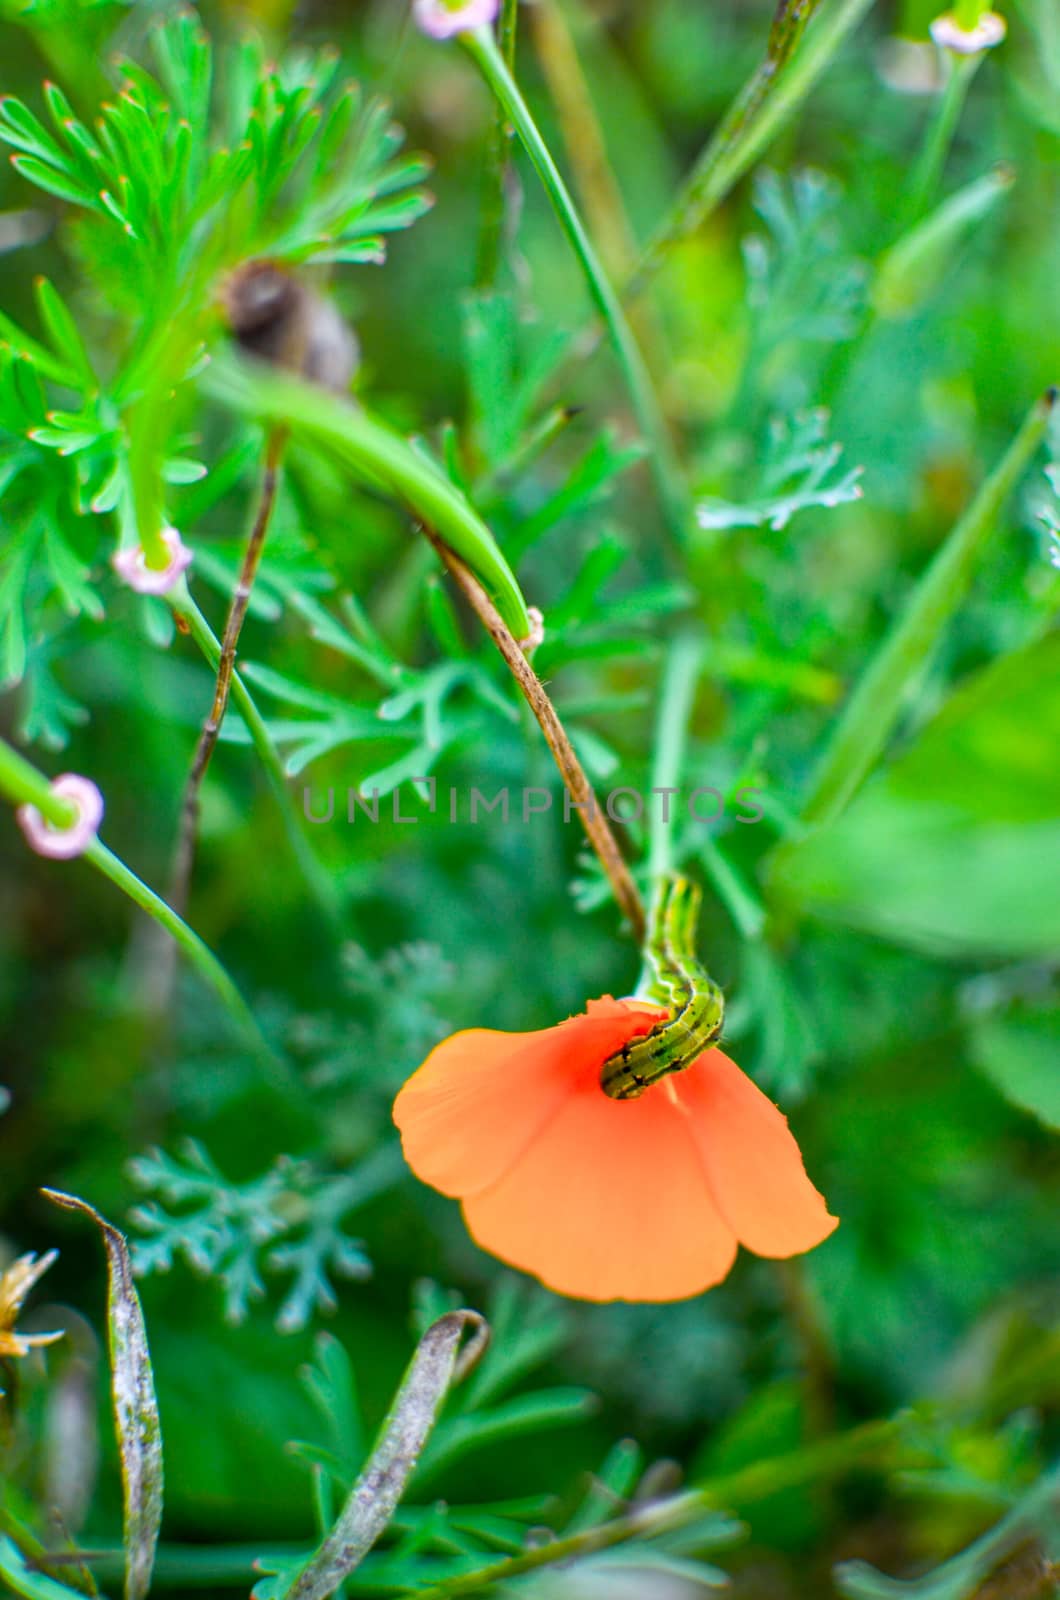 Orange eschscholzia on the meadow closeup with blured background and caterpillar by kimbo-bo